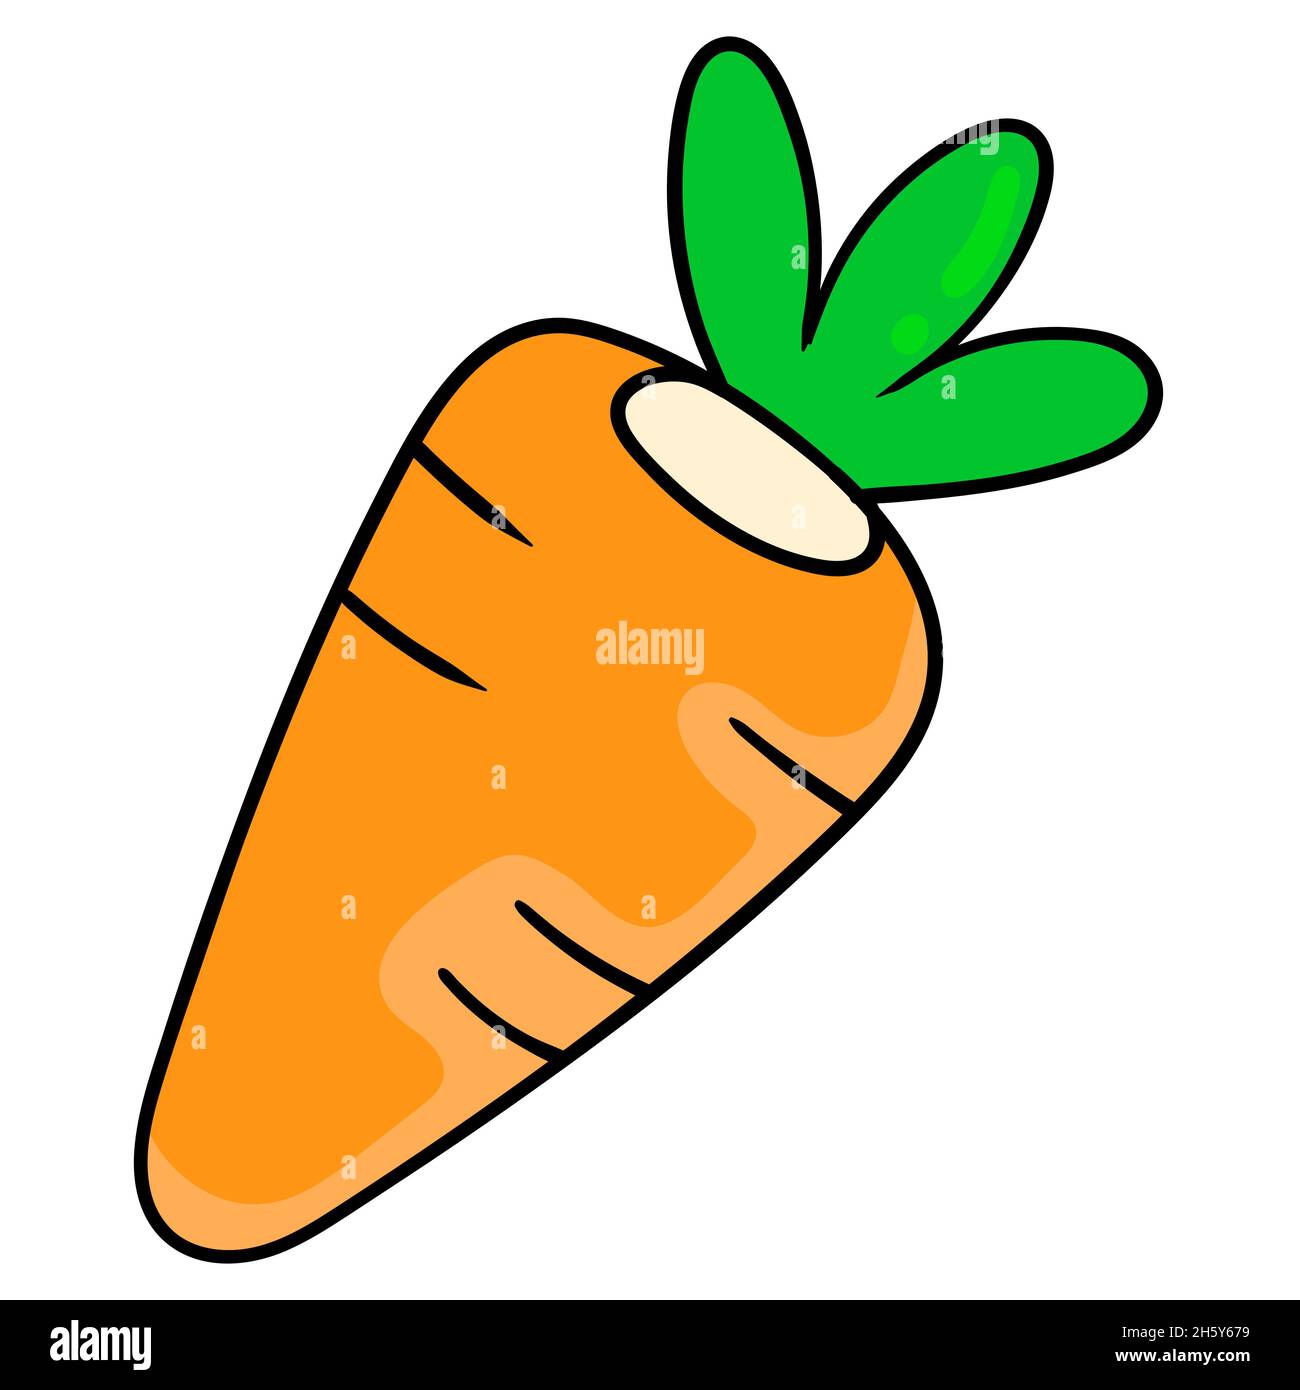 Vegetable display Stock Vector Images - Alamy